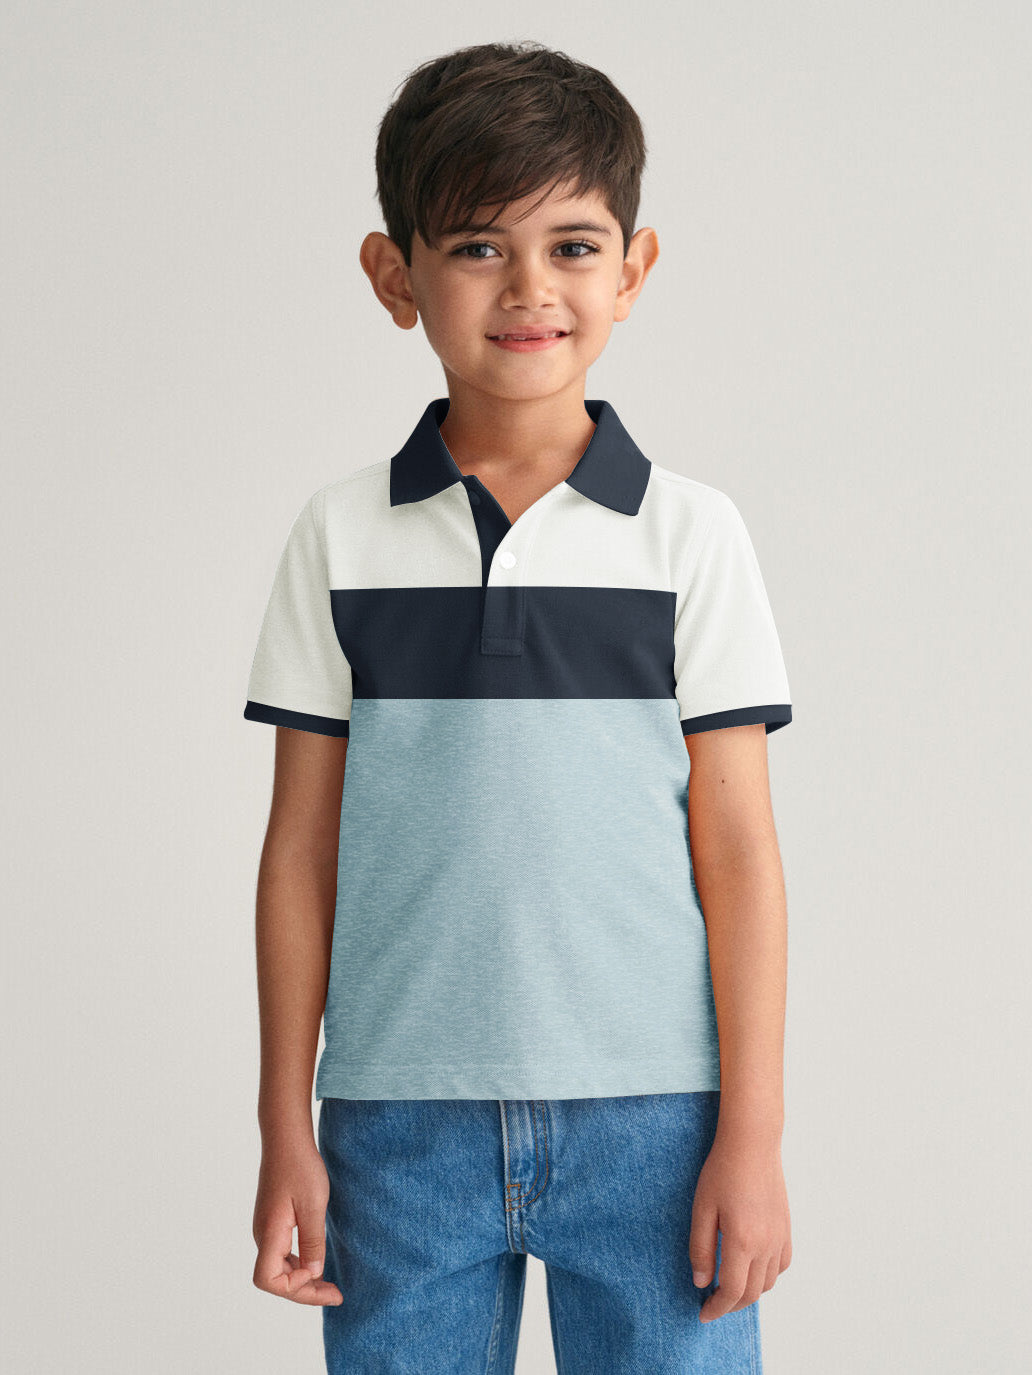 NXT Half Sleeve P.Q Polo Shirt For Kids-Sky Melange with White & Navy-SP1688